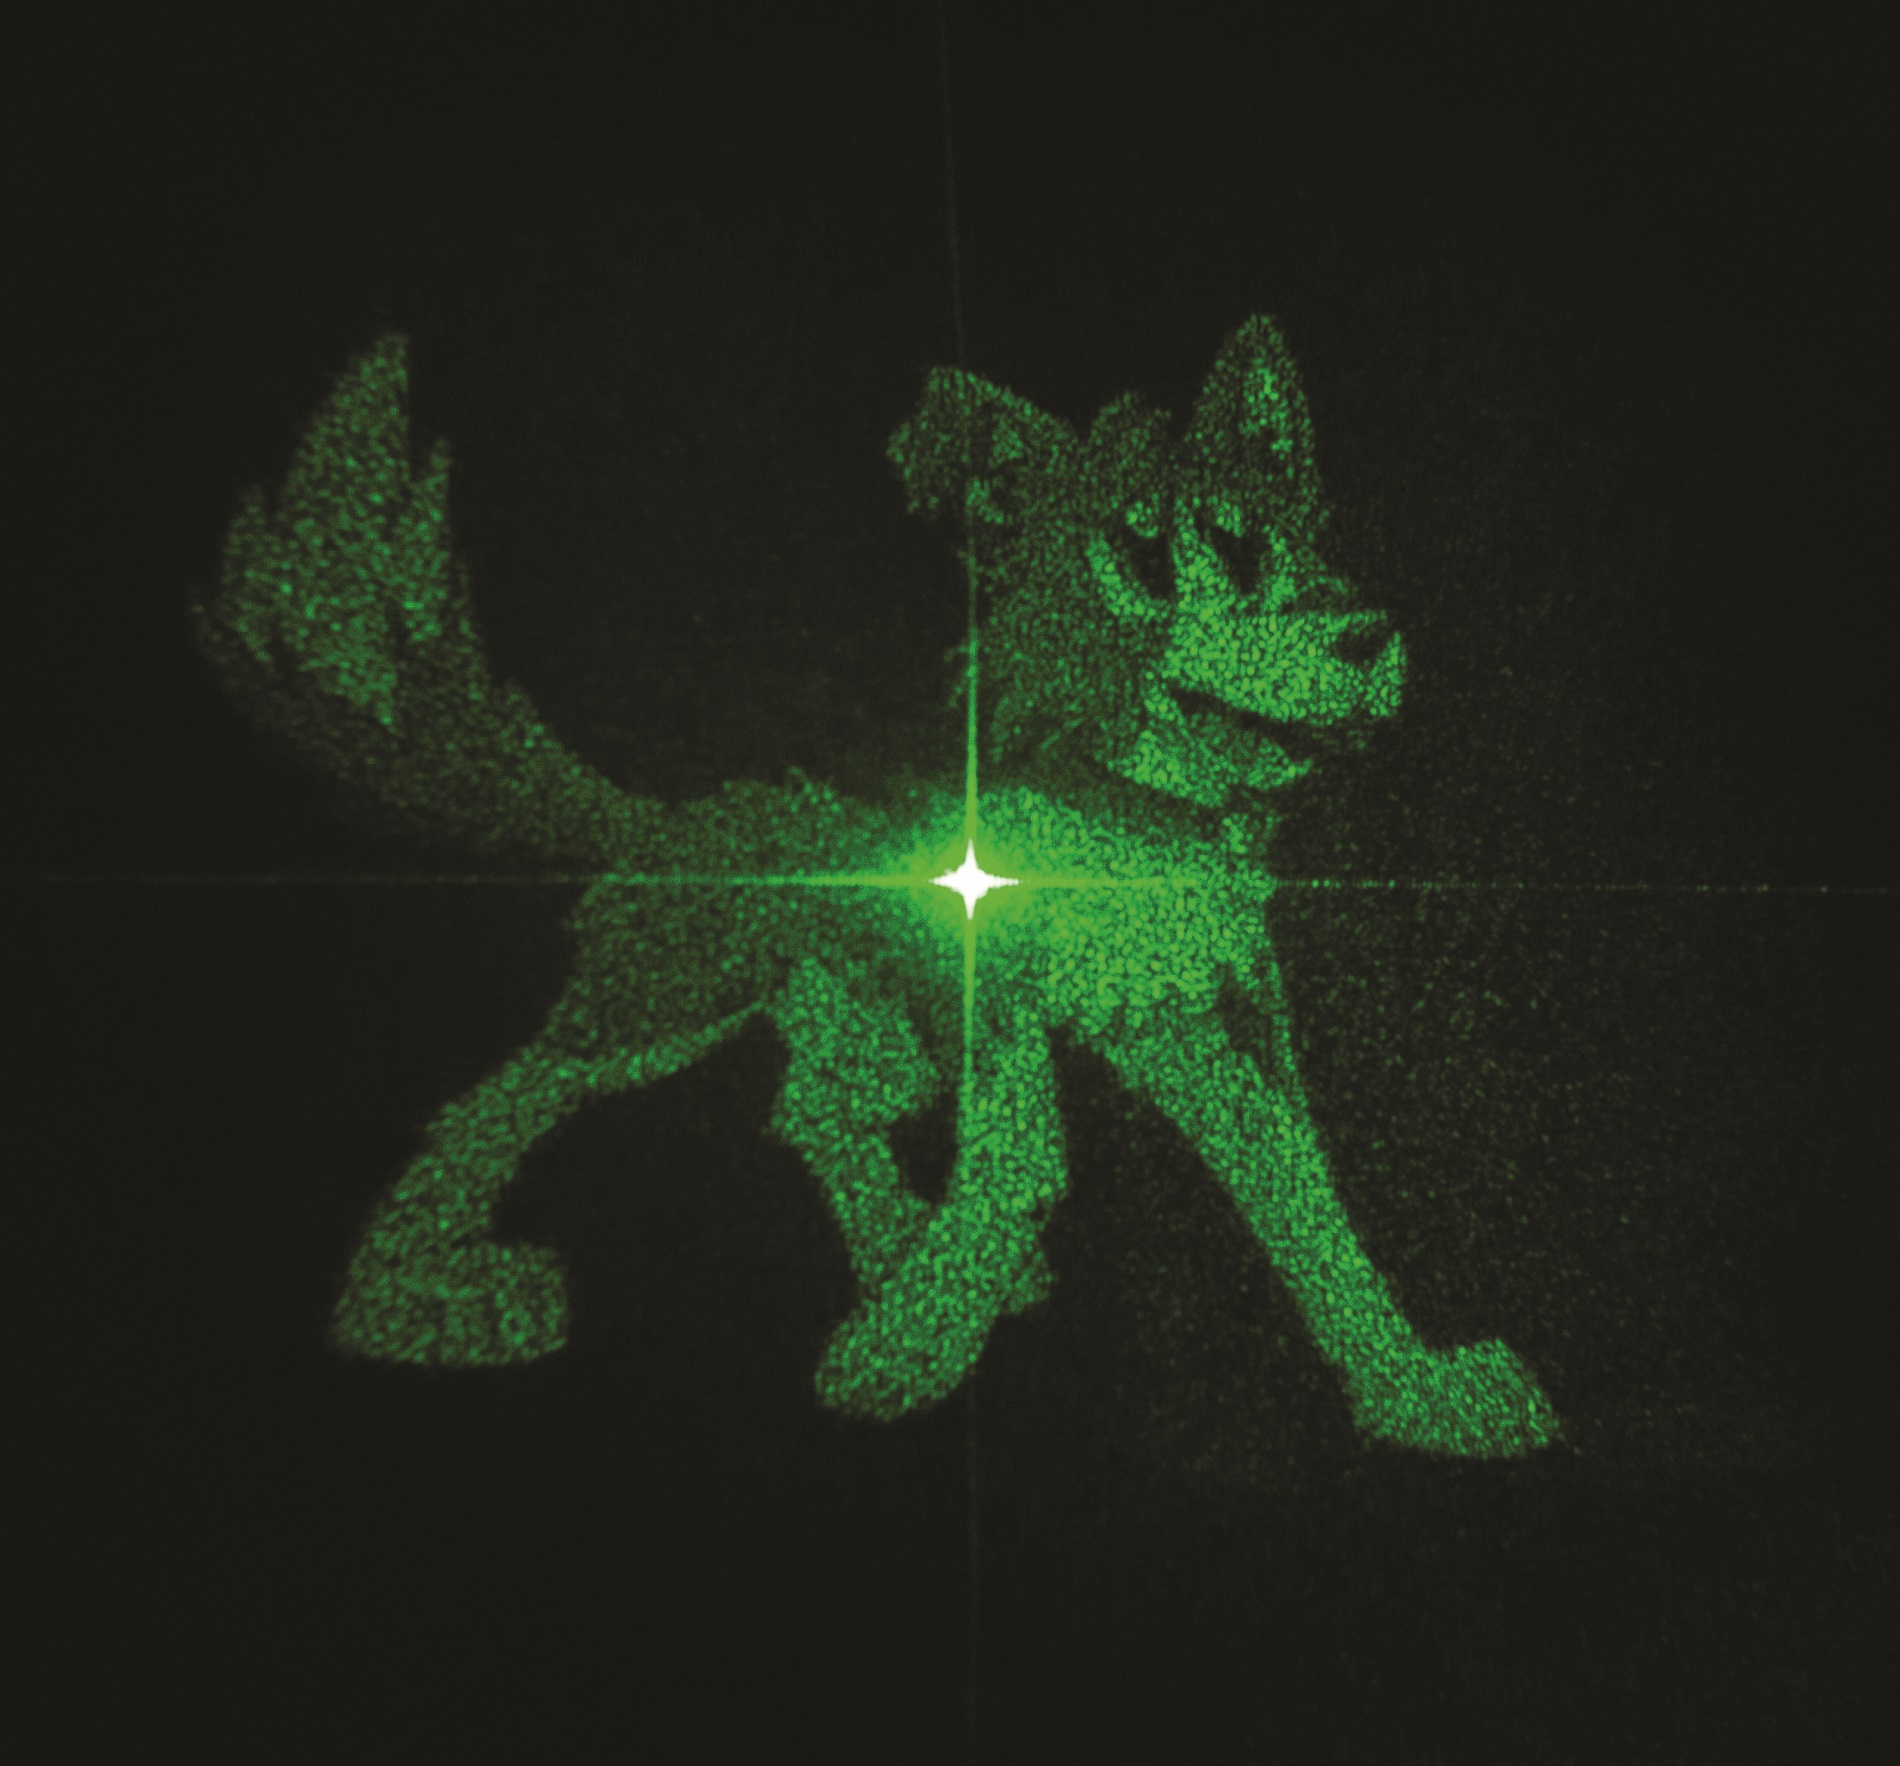 This hologram is one of two different holographic images encoded in a metasurface that can be unlocked separately with differently polarized light